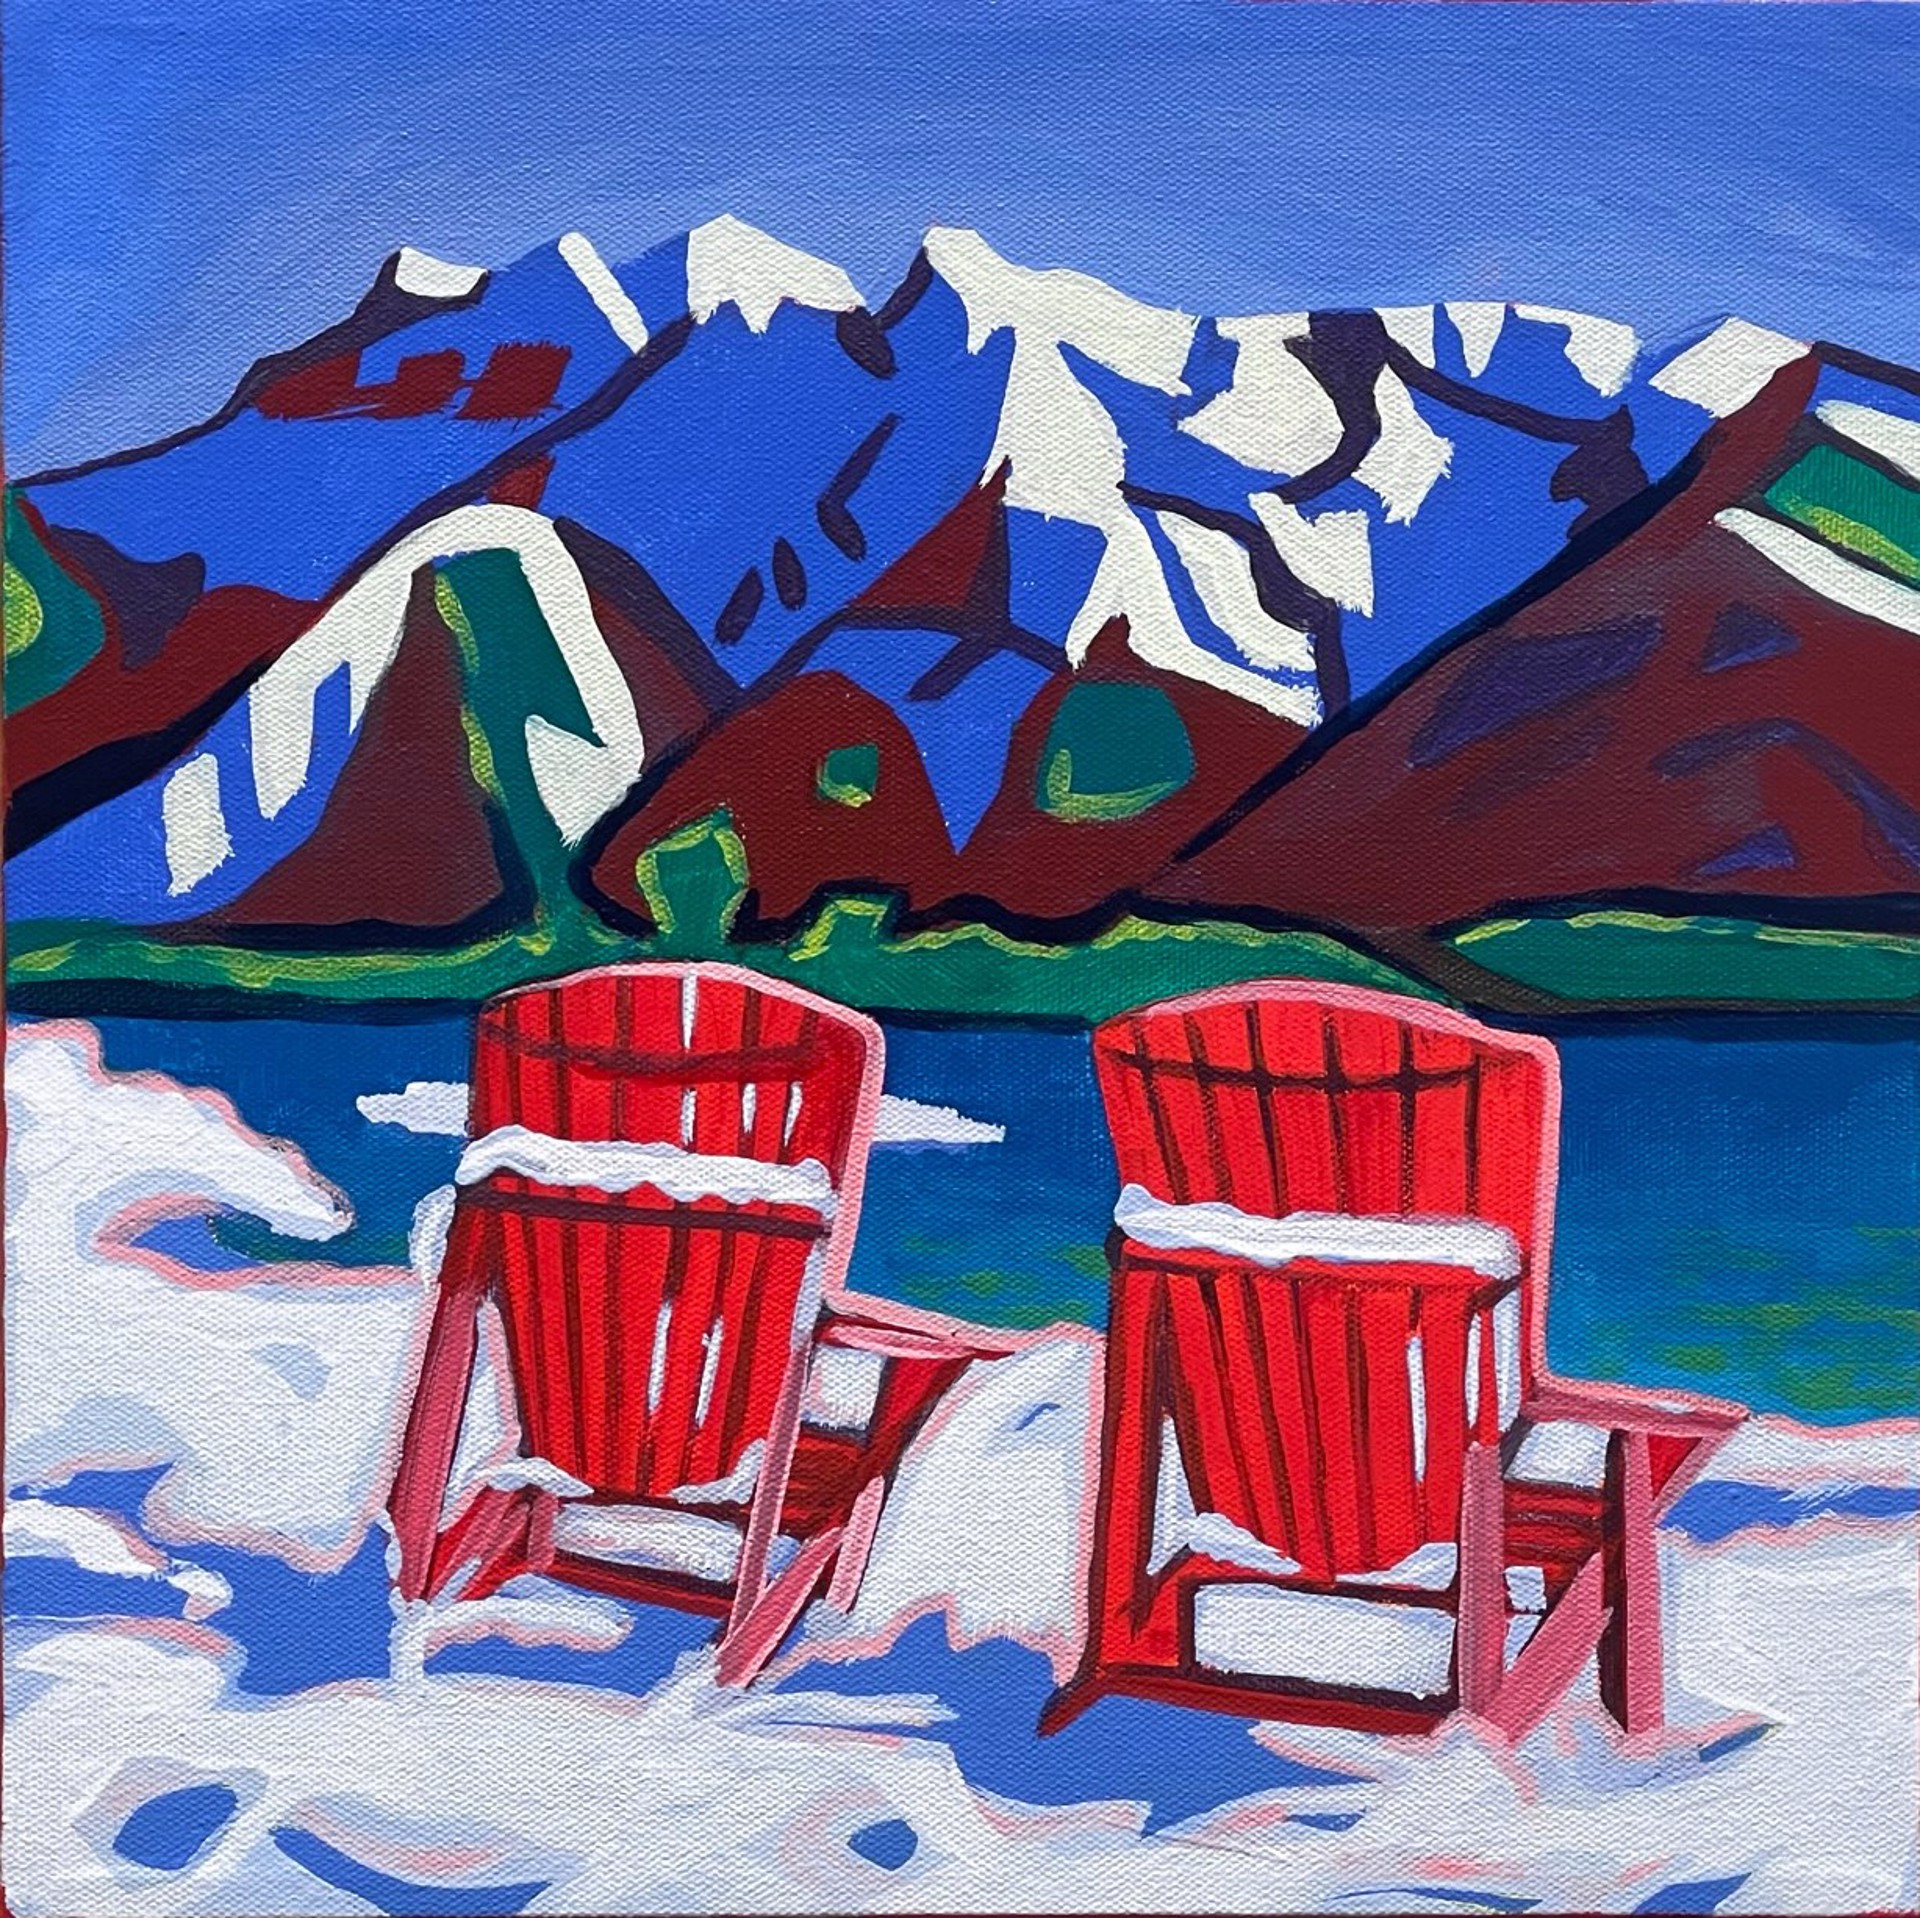 Those Red Chairs by BRANDY SATURLEY